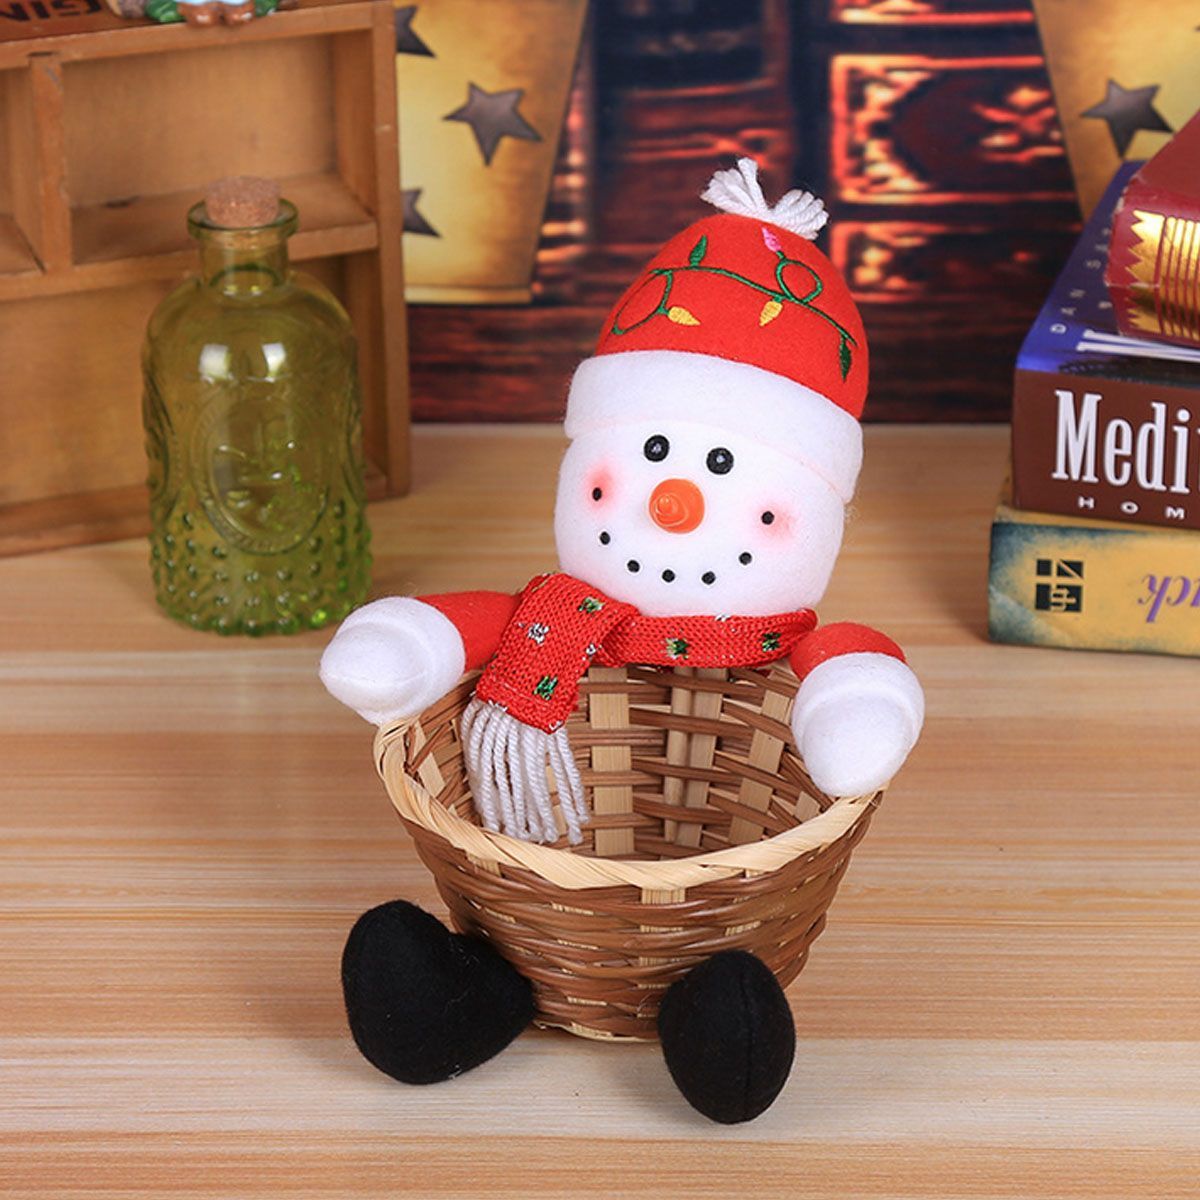 5-Types-Christmas-Candy-Storage-Basket-Santa-Claus-Home-Decorations-Ornaments-1477556